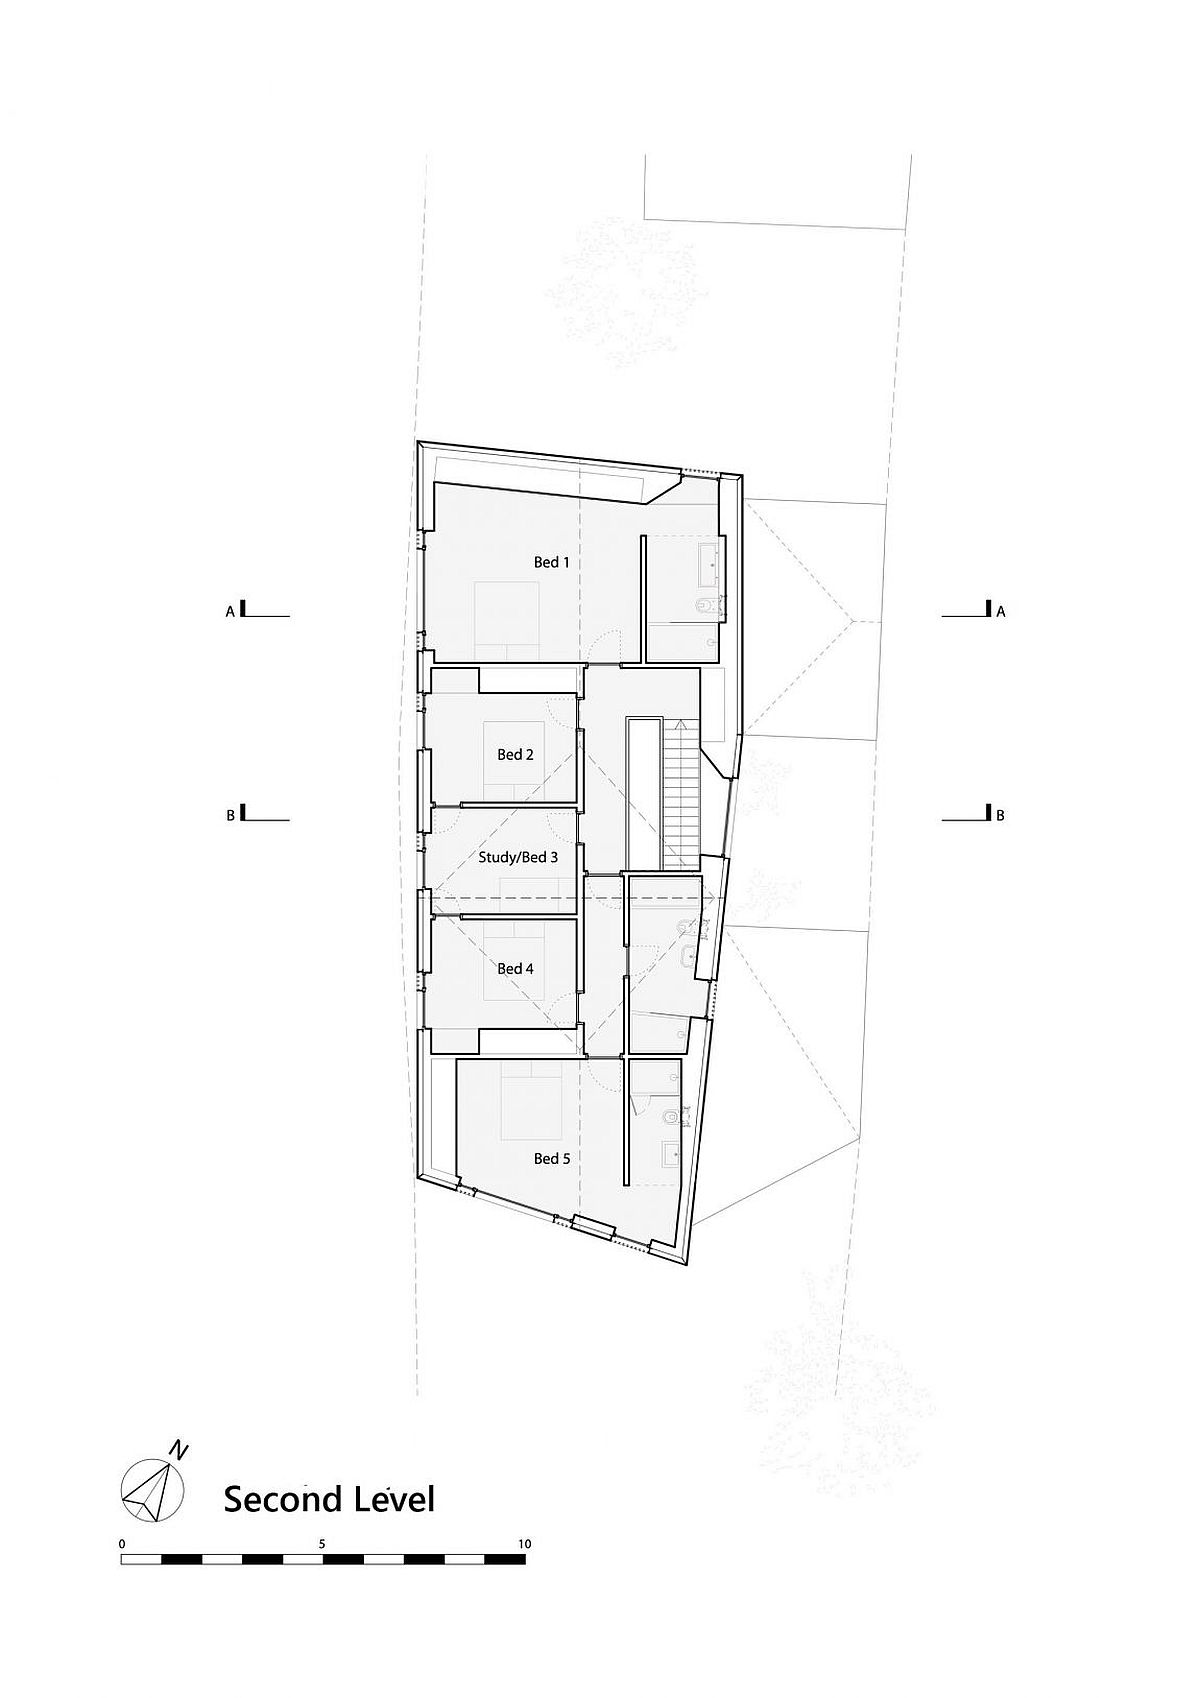 Second level floor plan of riverside English home with five bedrooms